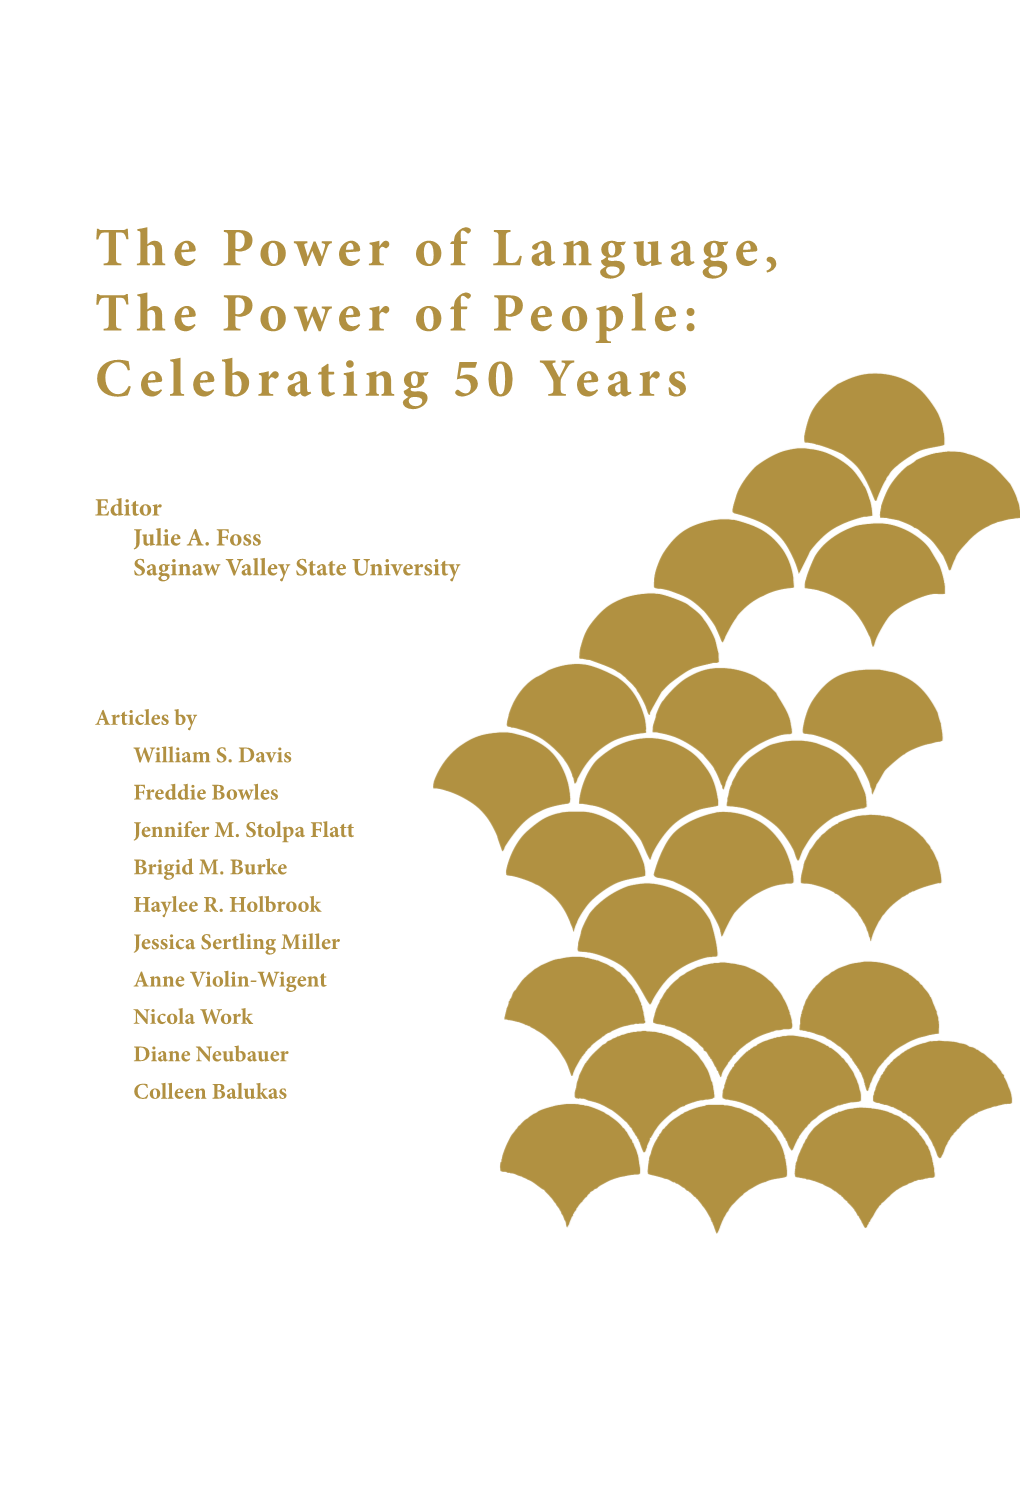 The Power of Language, the Power of People: Celebrating 50 Years